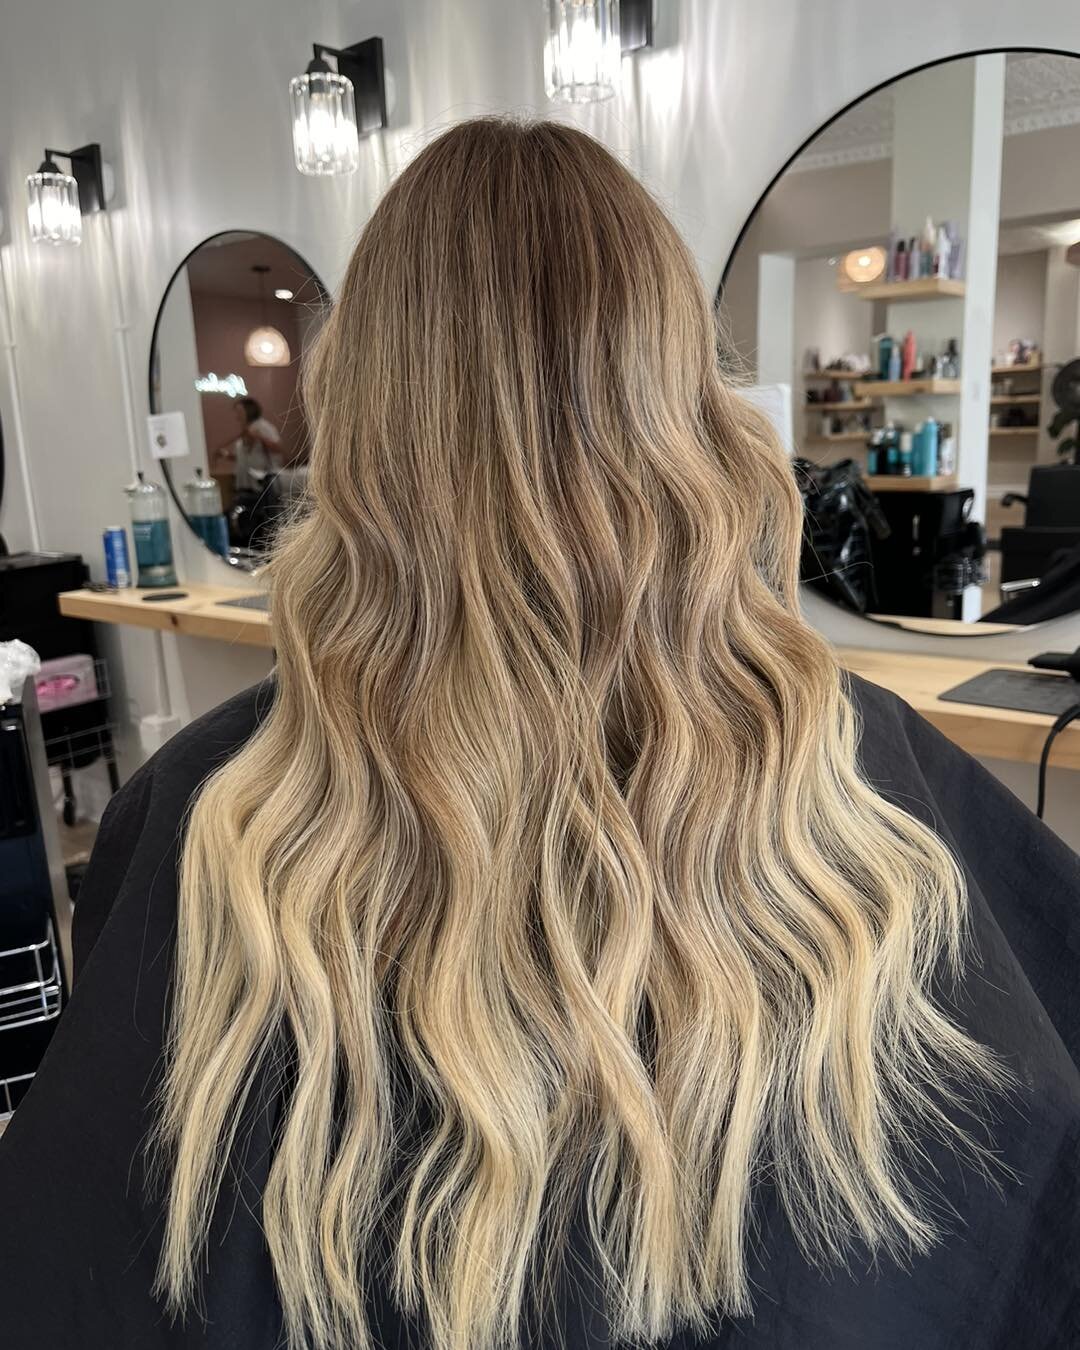 Experience a stunning hair transformation with our 24-inch Bellami tape-in extensions and highlights! ✨ Say goodbye to dull hair and hello to a vibrant, glamorous look! 

#MarshallMichigan #DesignStudioEast #HairTransformation #BellamiExtensions #Hig